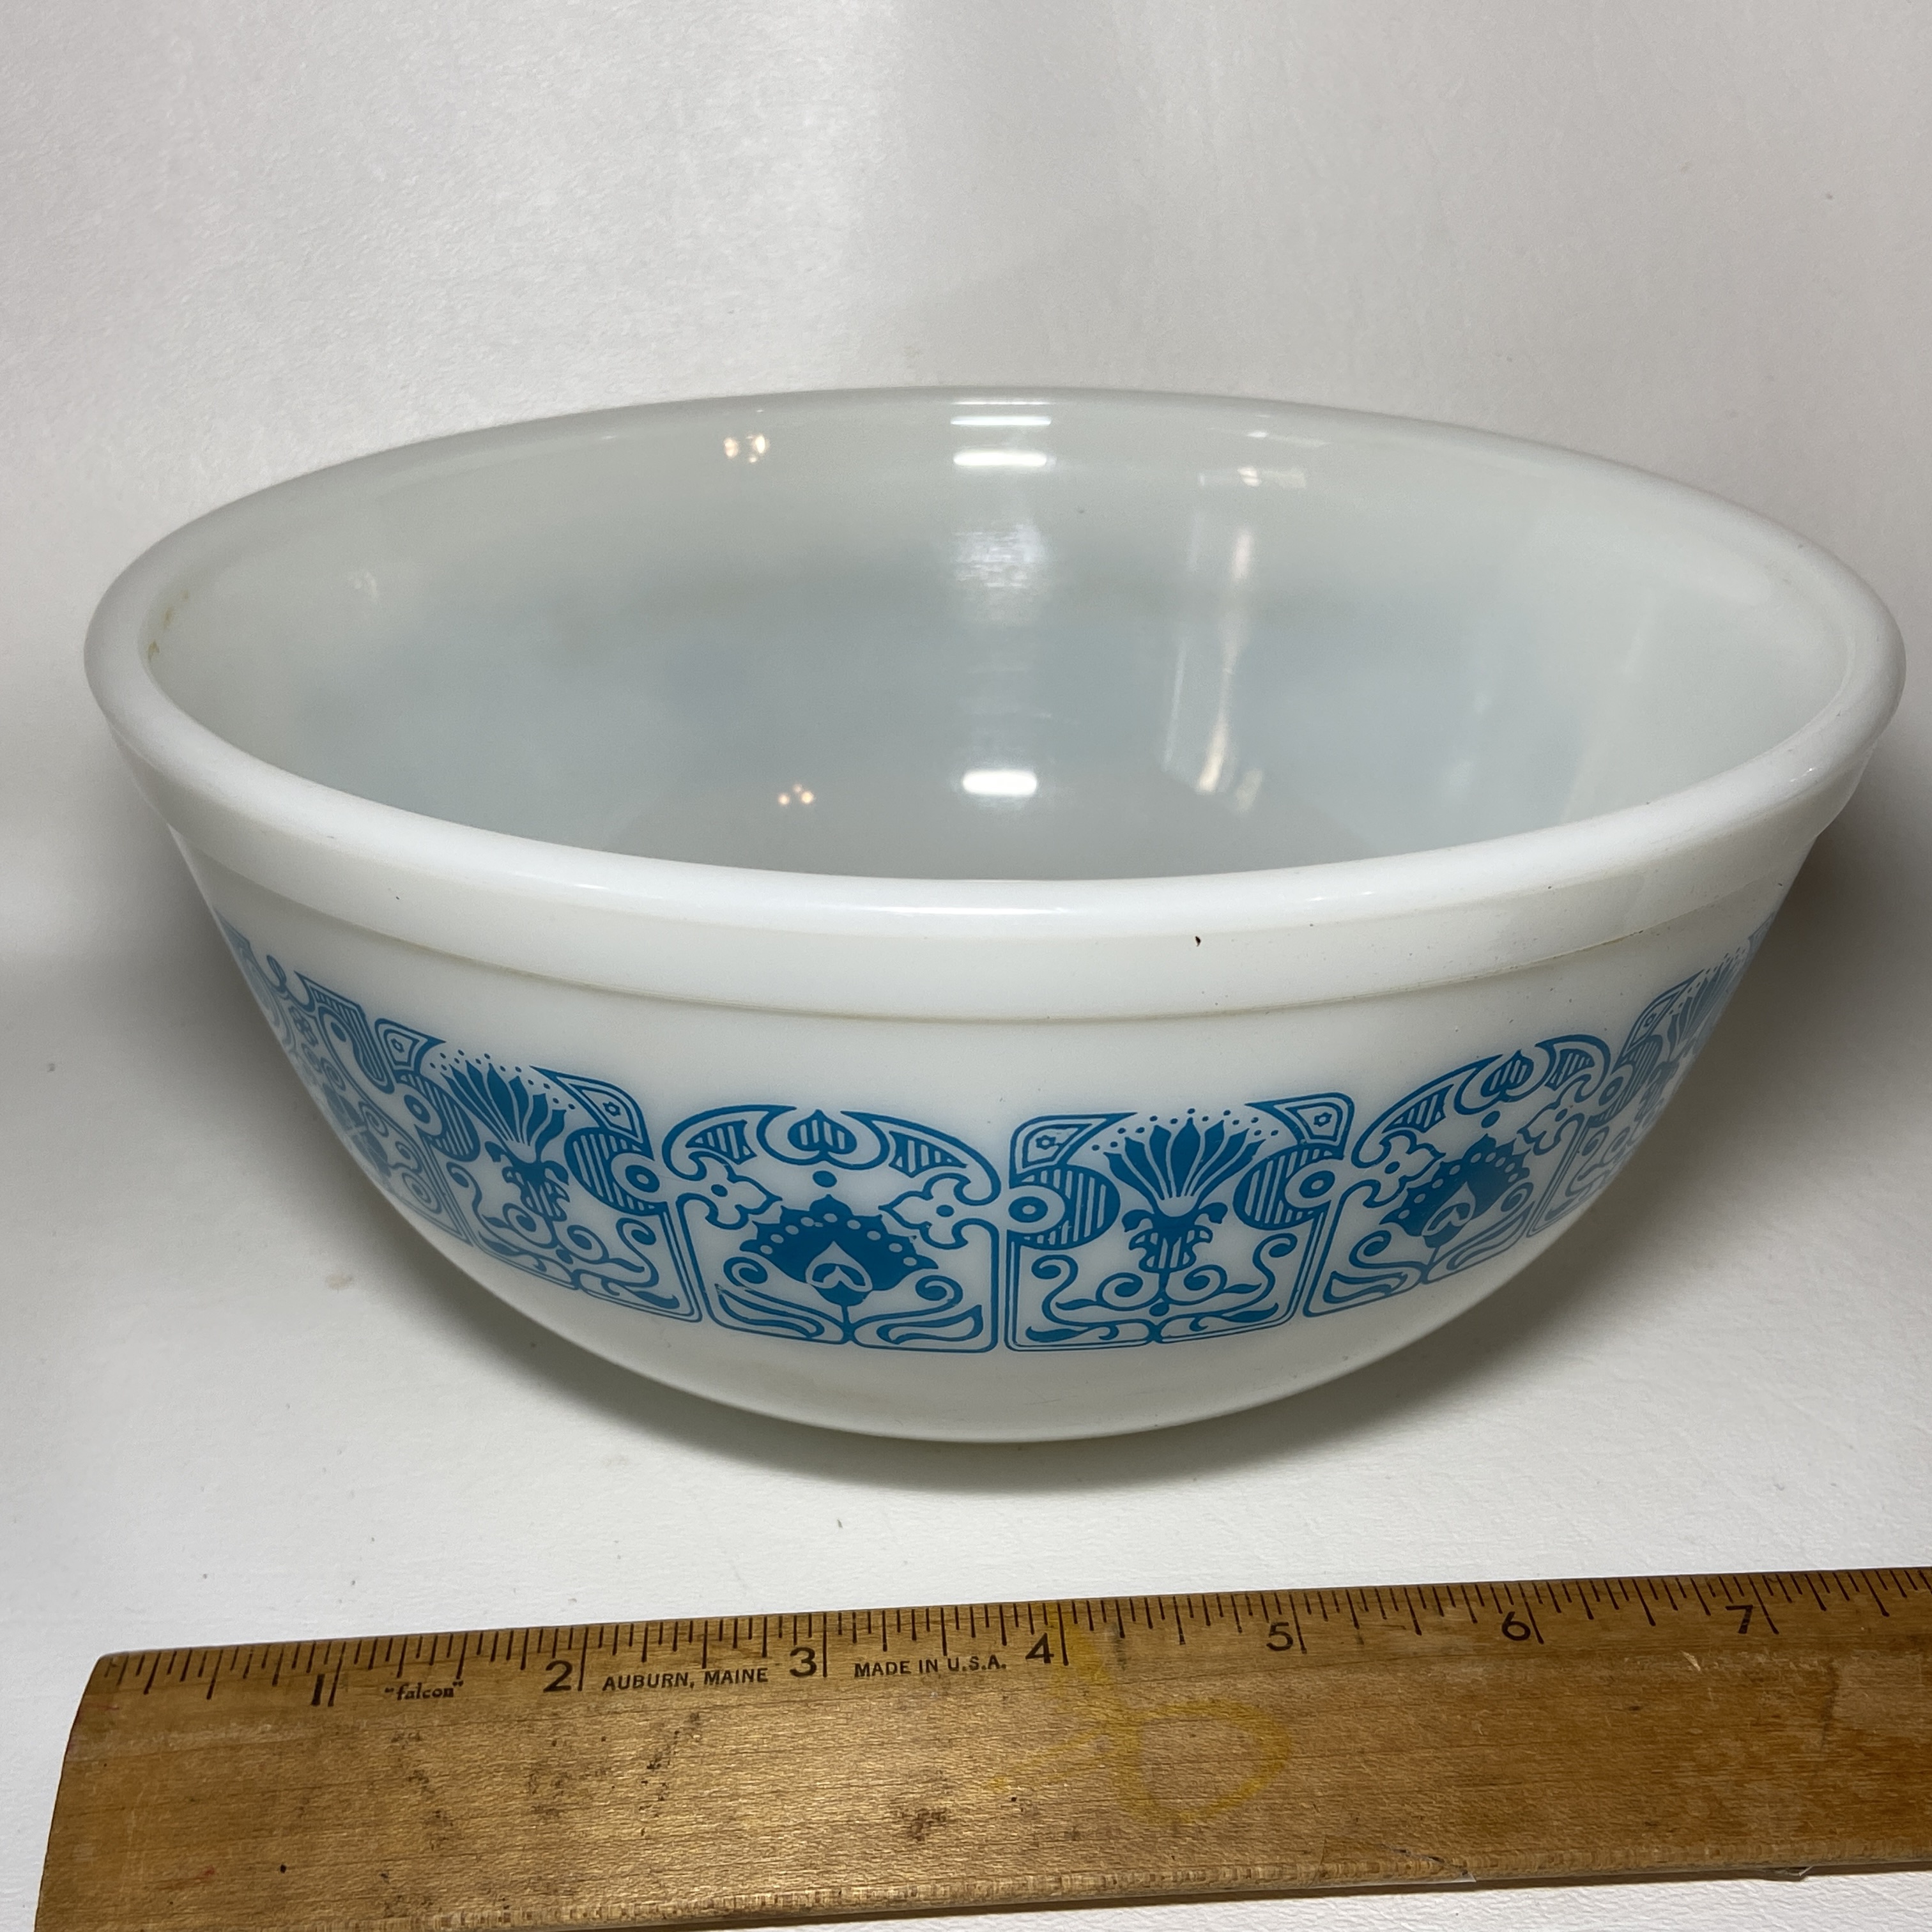 Sold at Auction: 2 Vintage Blue Pyrex Glass Mixing Bowls